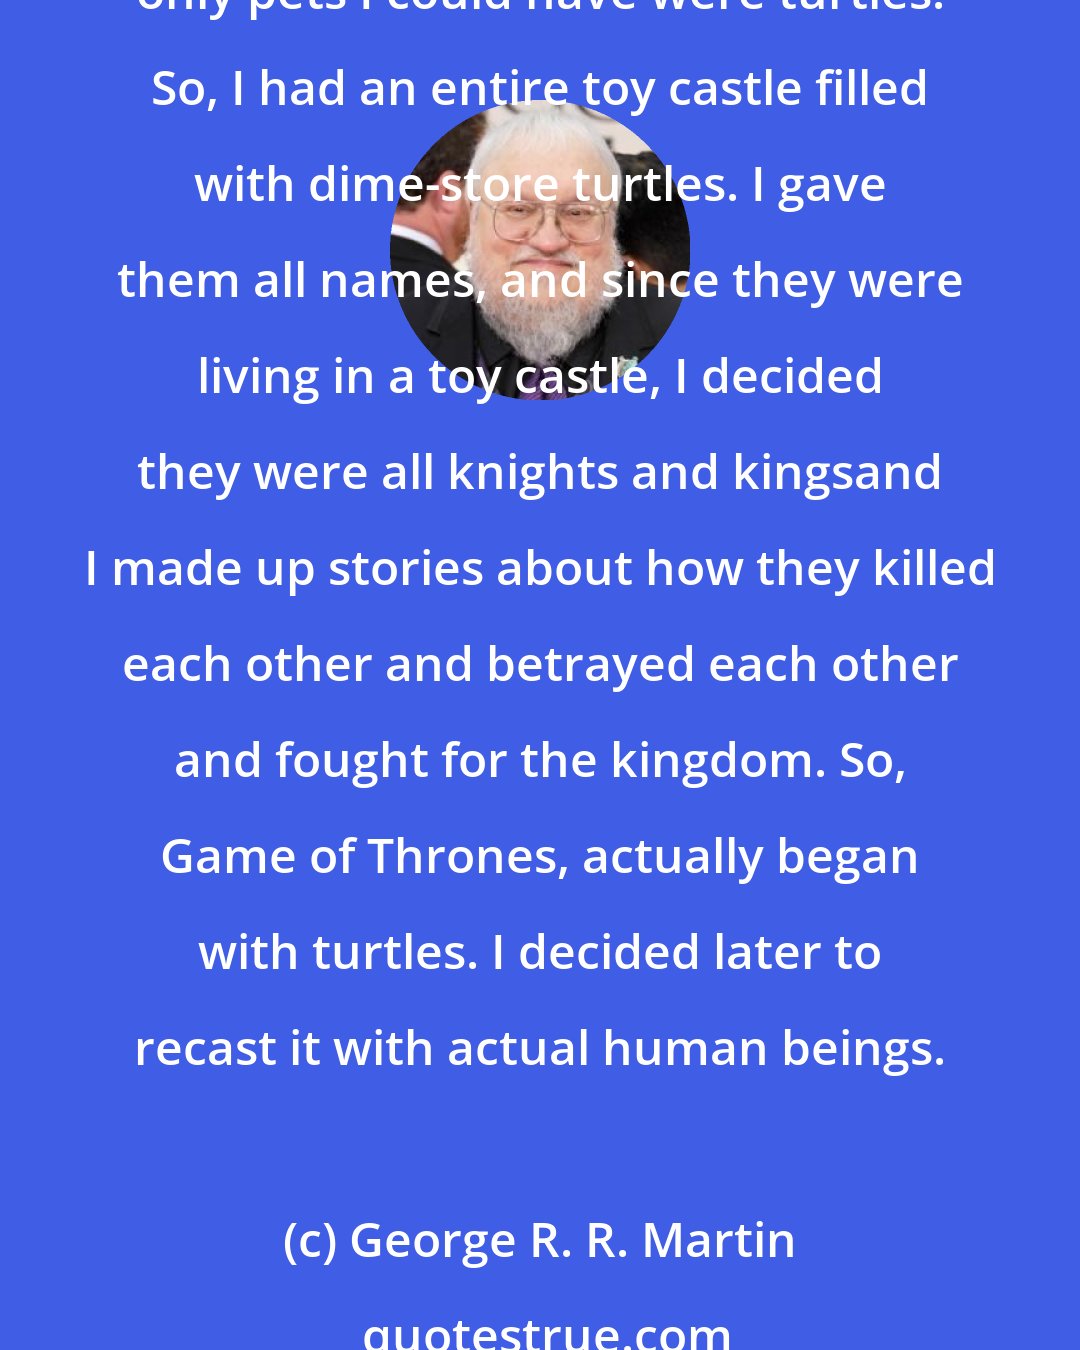 George R. R. Martin: Turtles have always been my sigil, I suppose. When I was a kid, growing up in Bayonne, NJ, I lived in a federal housing project, and we were not allowed to have a dog or cats. The only pets I could have were turtles. So, I had an entire toy castle filled with dime-store turtles. I gave them all names, and since they were living in a toy castle, I decided they were all knights and kingsand I made up stories about how they killed each other and betrayed each other and fought for the kingdom. So, Game of Thrones, actually began with turtles. I decided later to recast it with actual human beings.